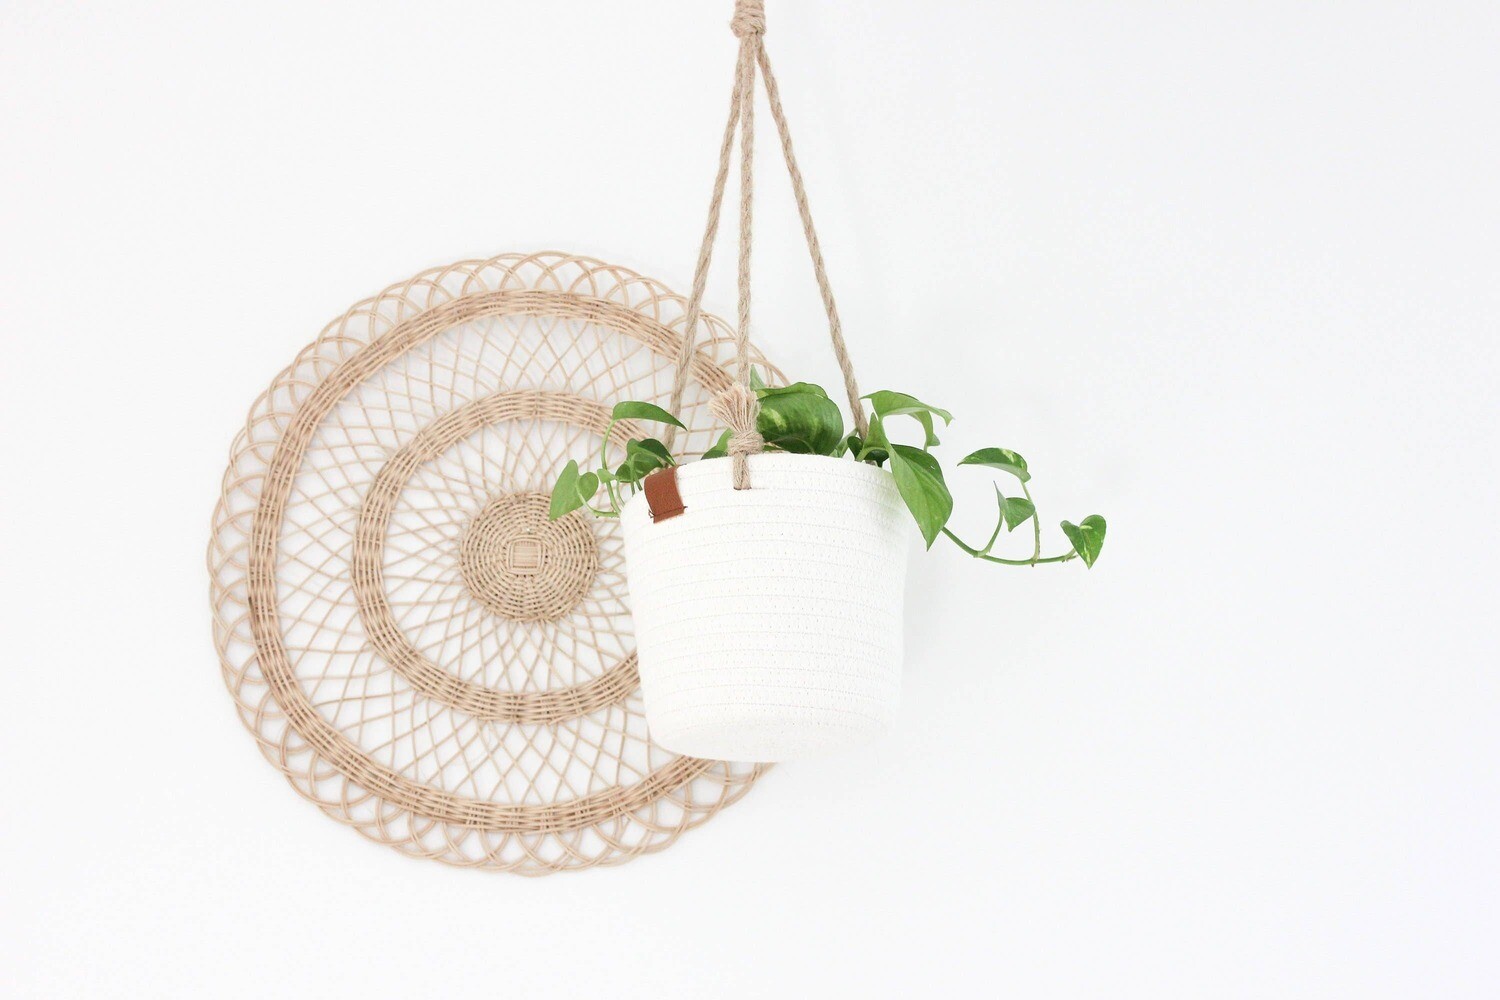 Boho Cotton Rope Hanging Planter Basket with Leather Accent 7"